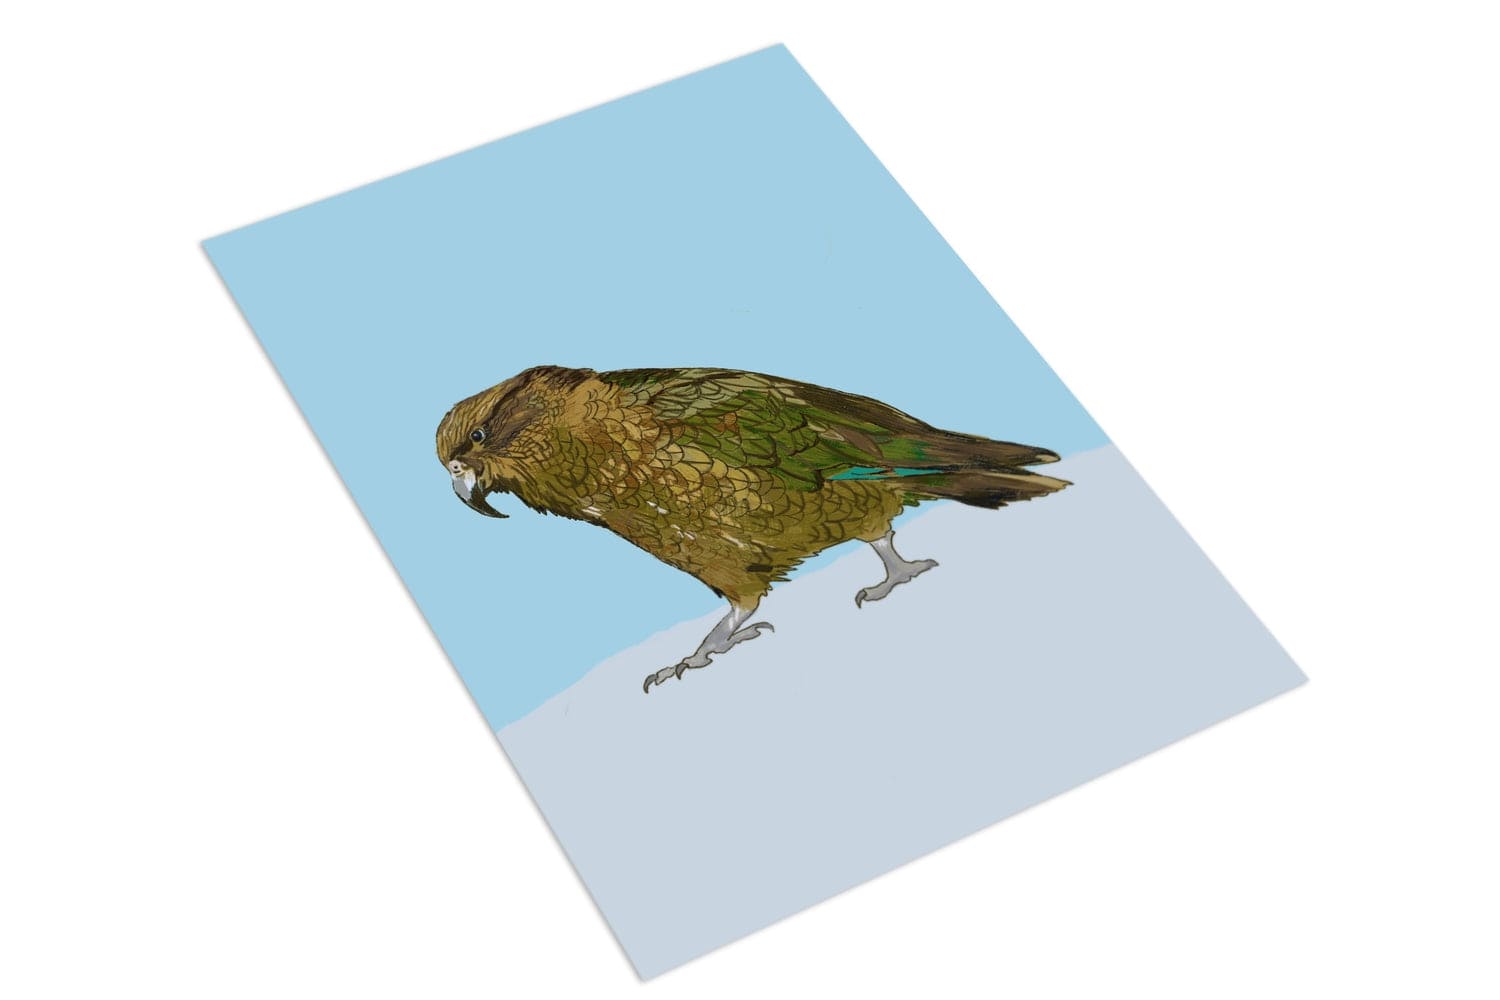 Kea - The Paper People Greeting Cards